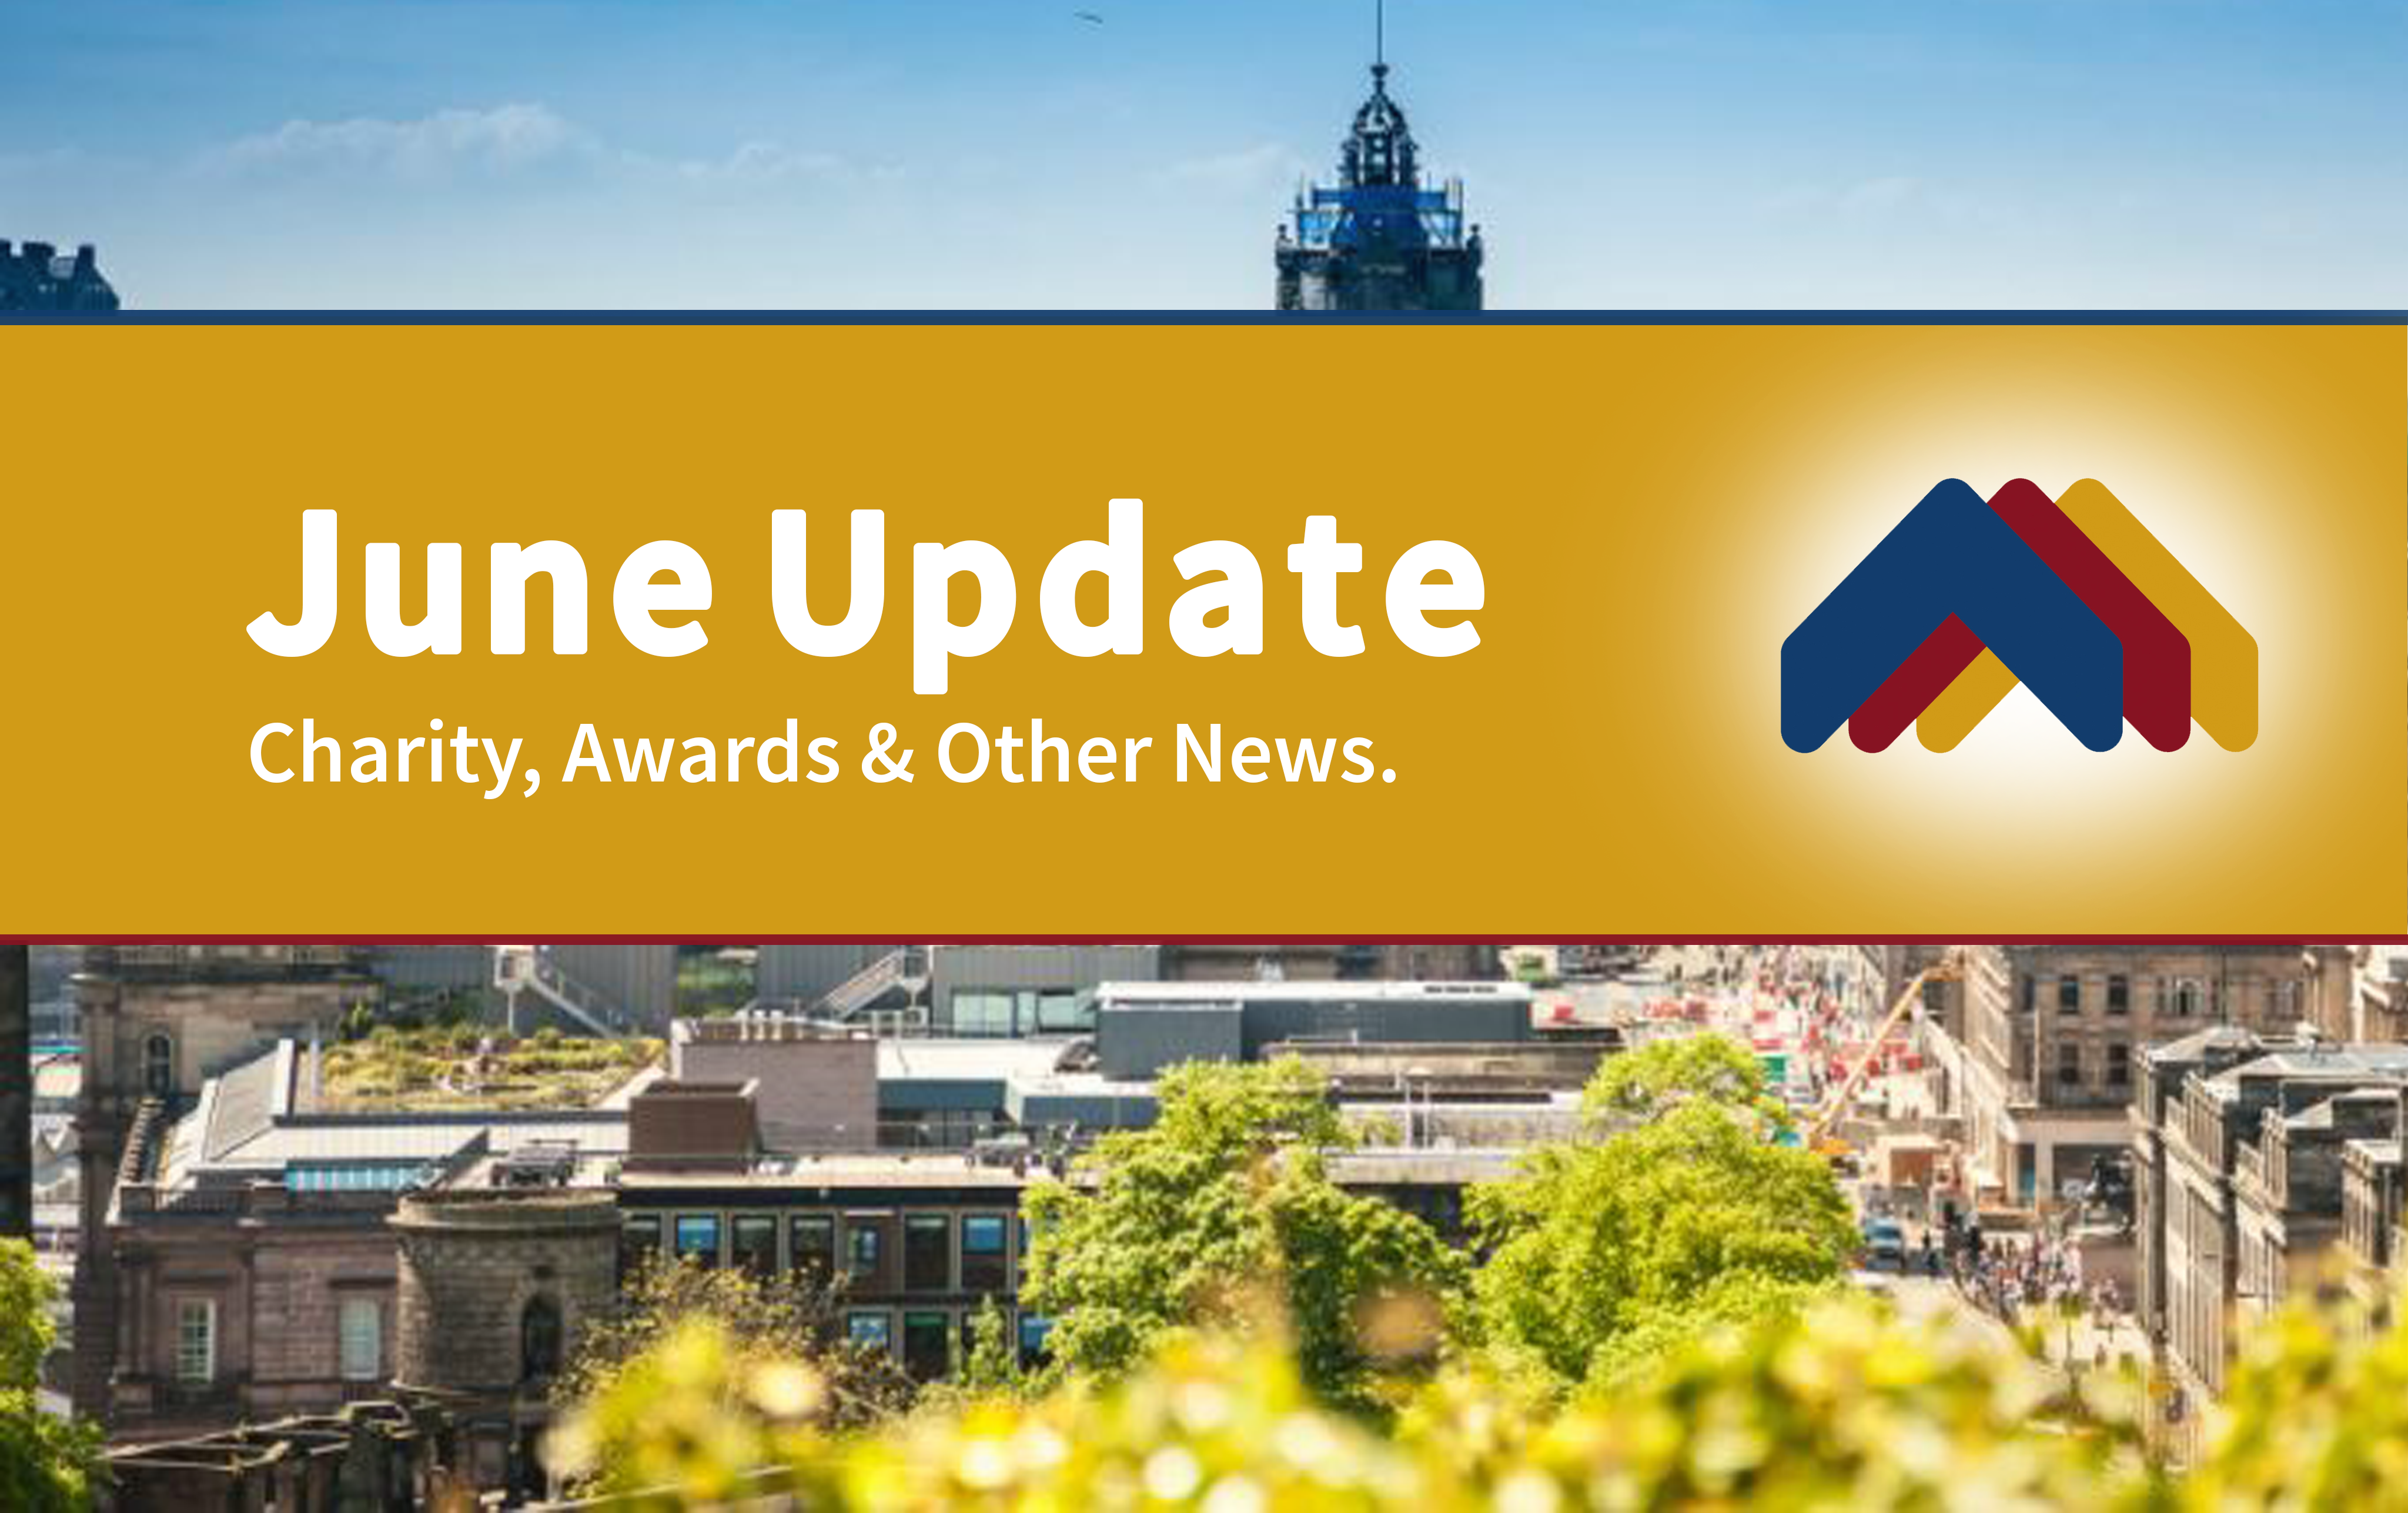 June Update From Cullen Property | Charity, Awards & Other News